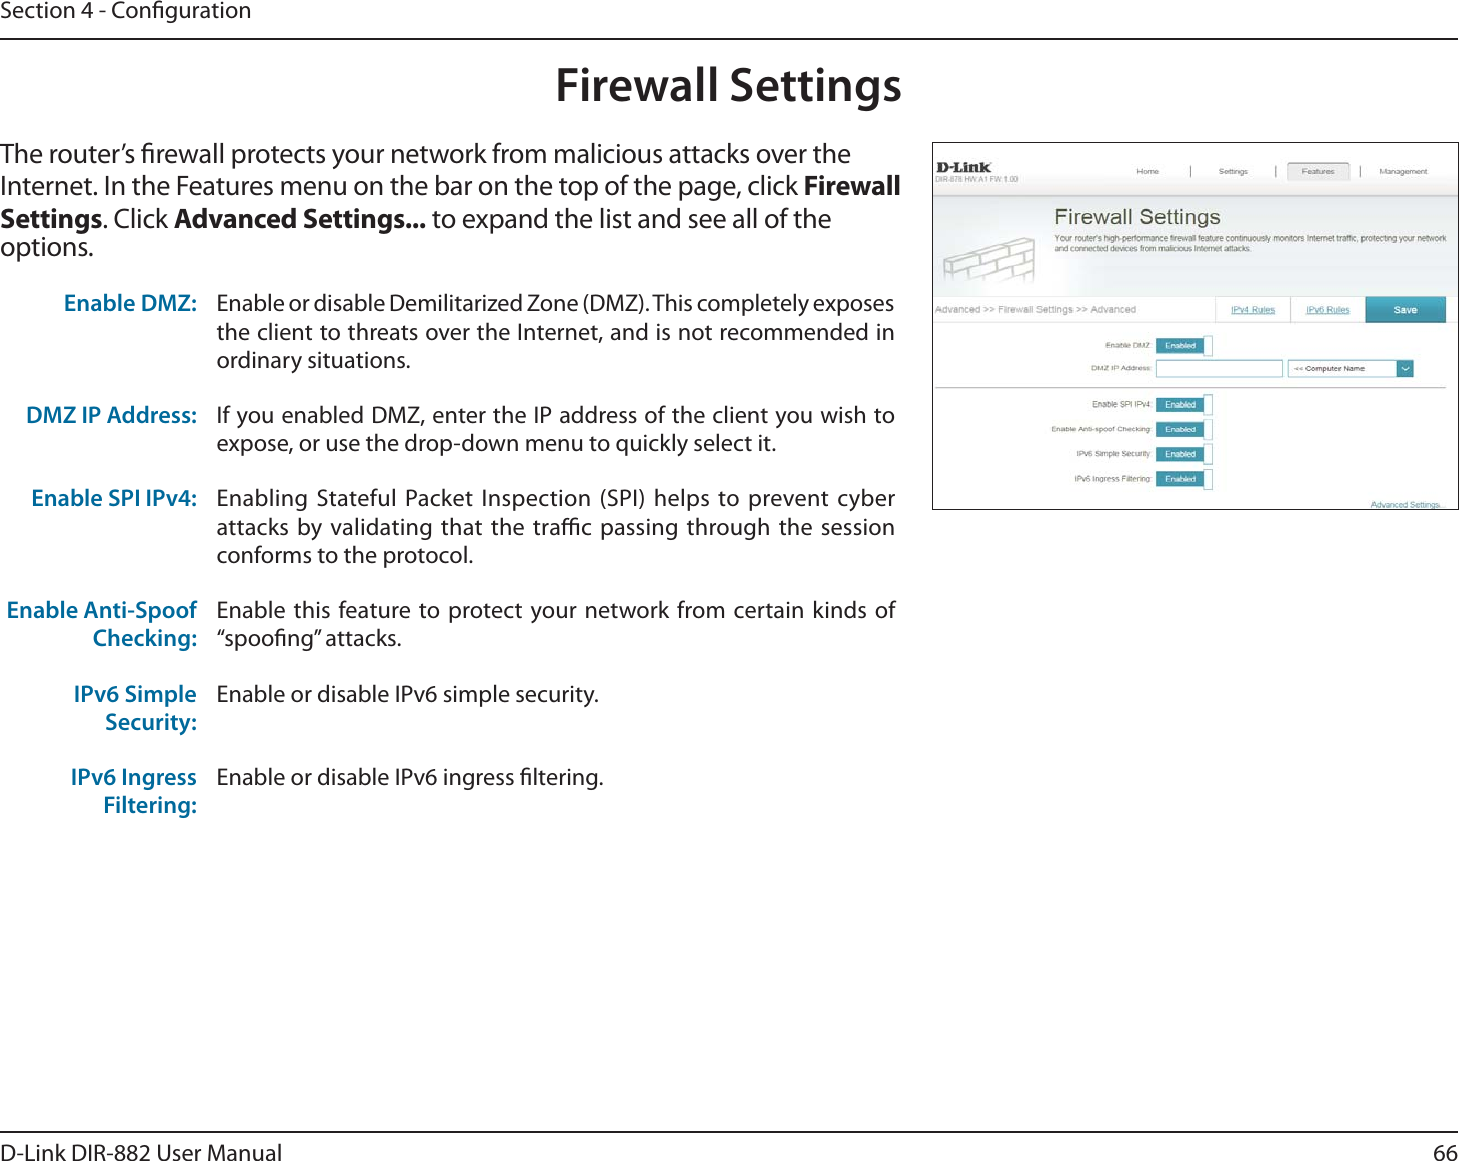 66D-Link DIR-882 User ManualSection 4 - CongurationFirewall SettingsThe router’s rewall protects your network from malicious attacks over the Internet. In the Features menu on the bar on the top of the page, click &apos;JSFXBMMSettings. Click &quot;EWBODFE4FUUJOHT to expand the list and see all of the options. Enable DMZ: Enable or disable Demilitarized Zone (DMZ). This completely exposes the client to threats over the Internet, and is not recommended in ordinary situations.DMZ IP Address: If you enabled DMZ, enter the IP address of the client you wish to expose, or use the drop-down menu to quickly select it.Enable SPI IPv4: Enabling Stateful Packet Inspection (SPI) helps to prevent cyber attacks by validating that the trac passing through the session conforms to the protocol.Enable Anti-Spoof Checking:Enable this feature to protect your network from certain kinds of iTQPPöOHwBUUBDLTIPv6 Simple Security:Enable or disable IPv6 simple security.IPv6 Ingress Filtering:Enable or disable IPv6 ingress ltering.